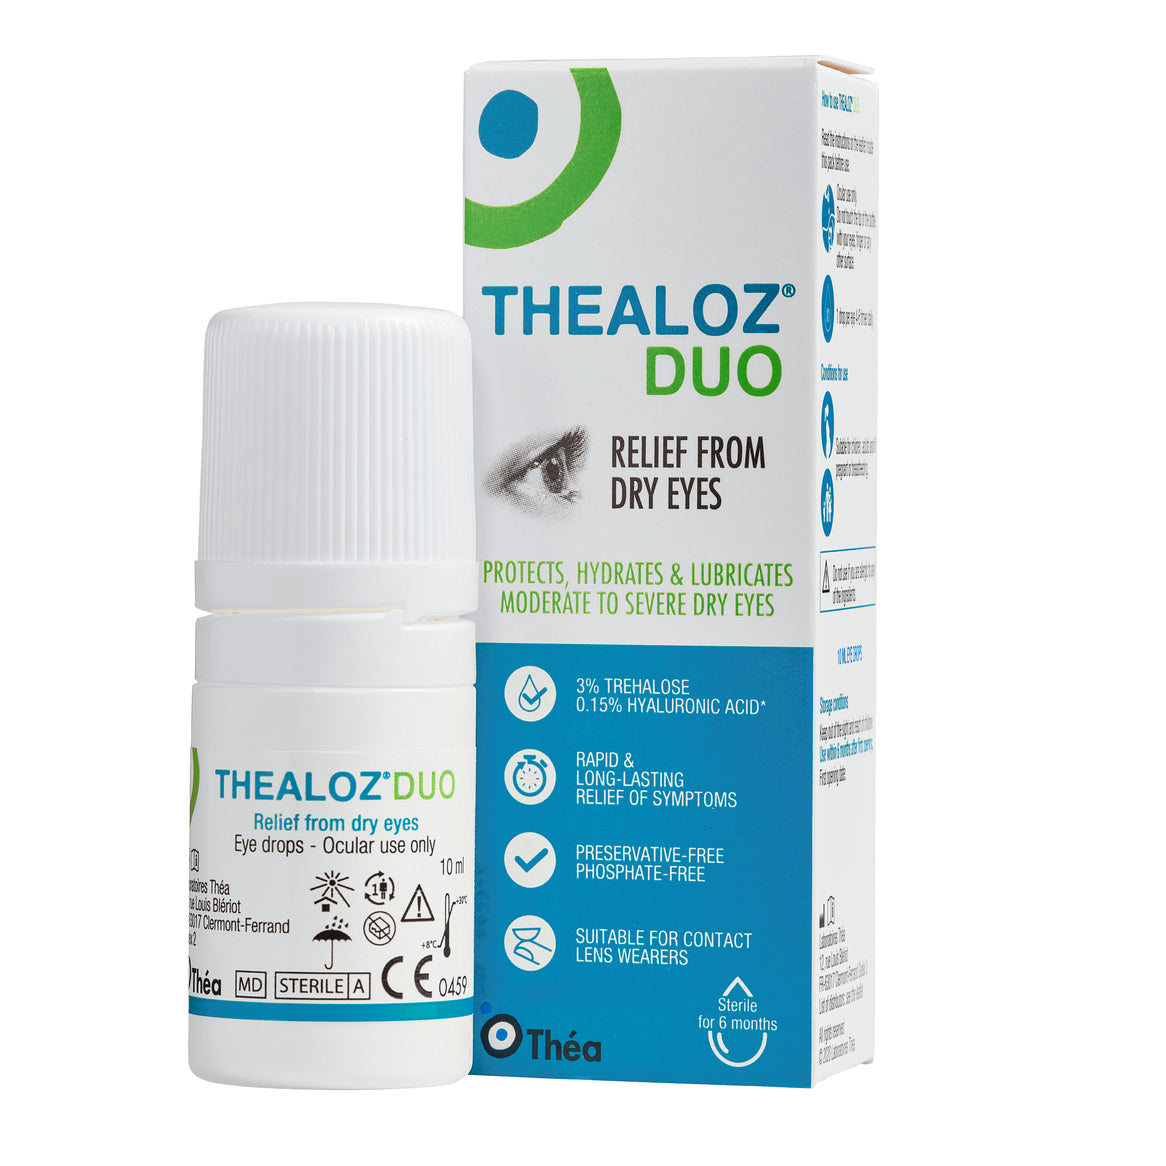 Thealoz Duo product box in portrait position behind a product sample